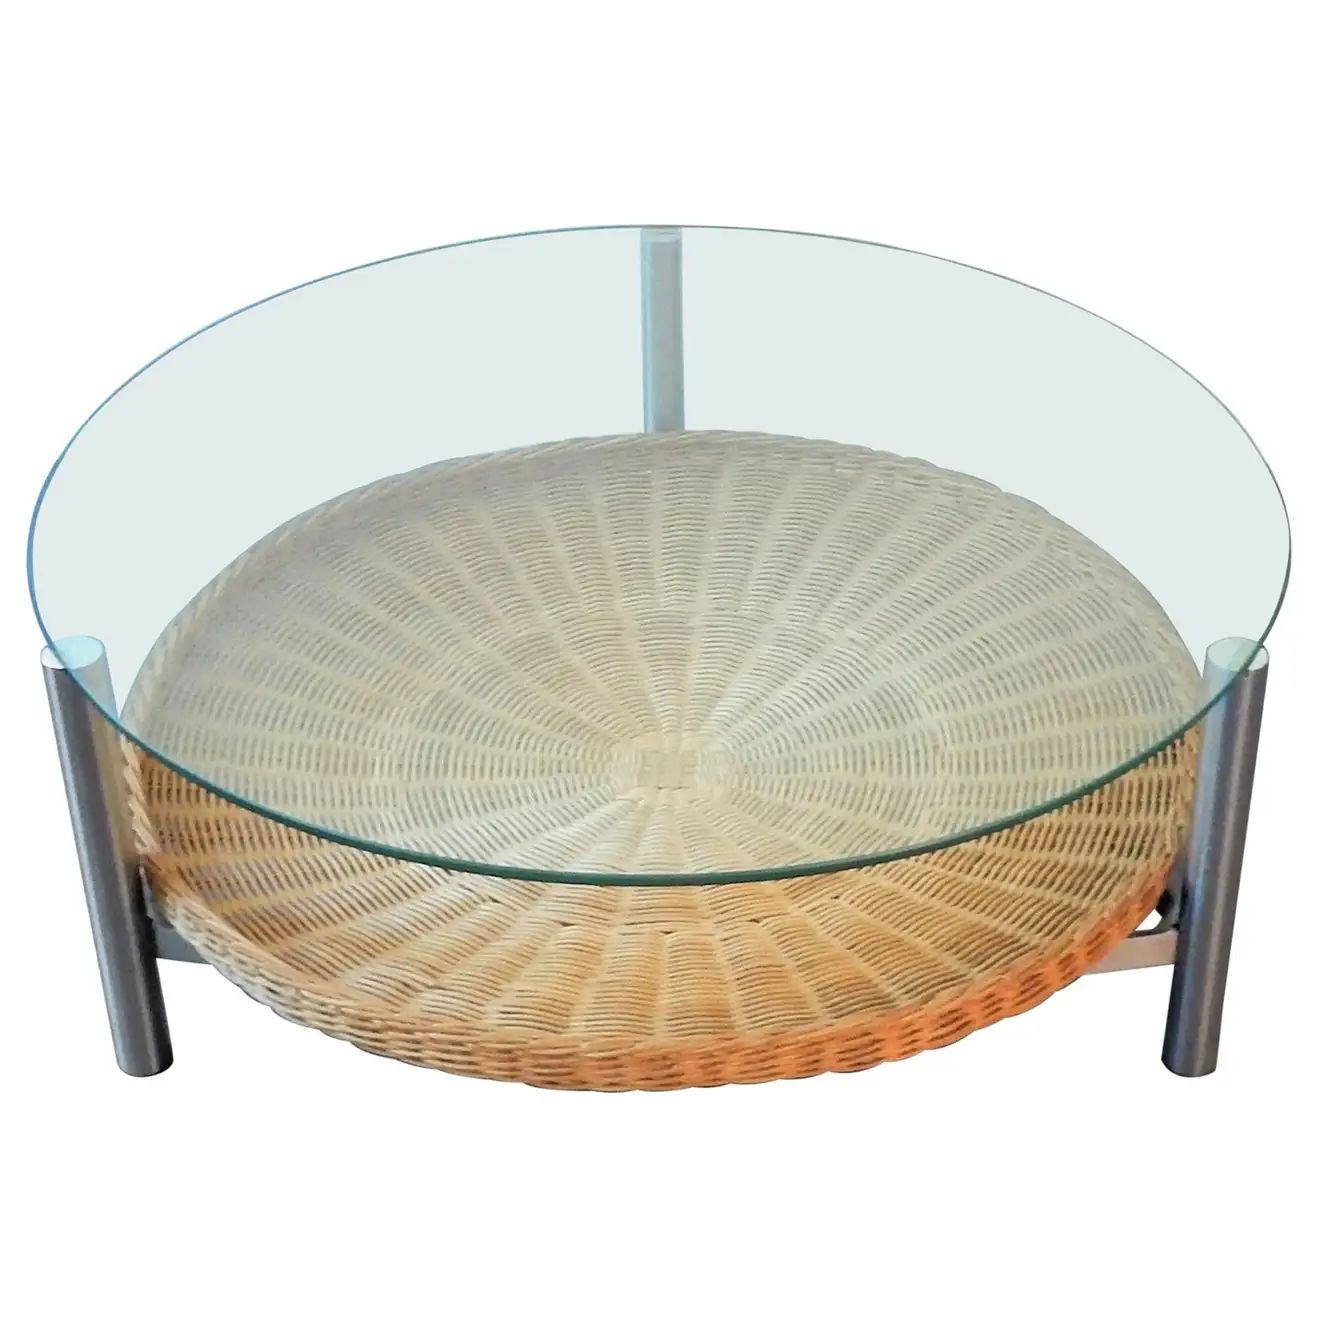 Vintage Coffee Table of a Metal Frame, Wicker Basket and Glass Top, Netherlands | 1stDibs